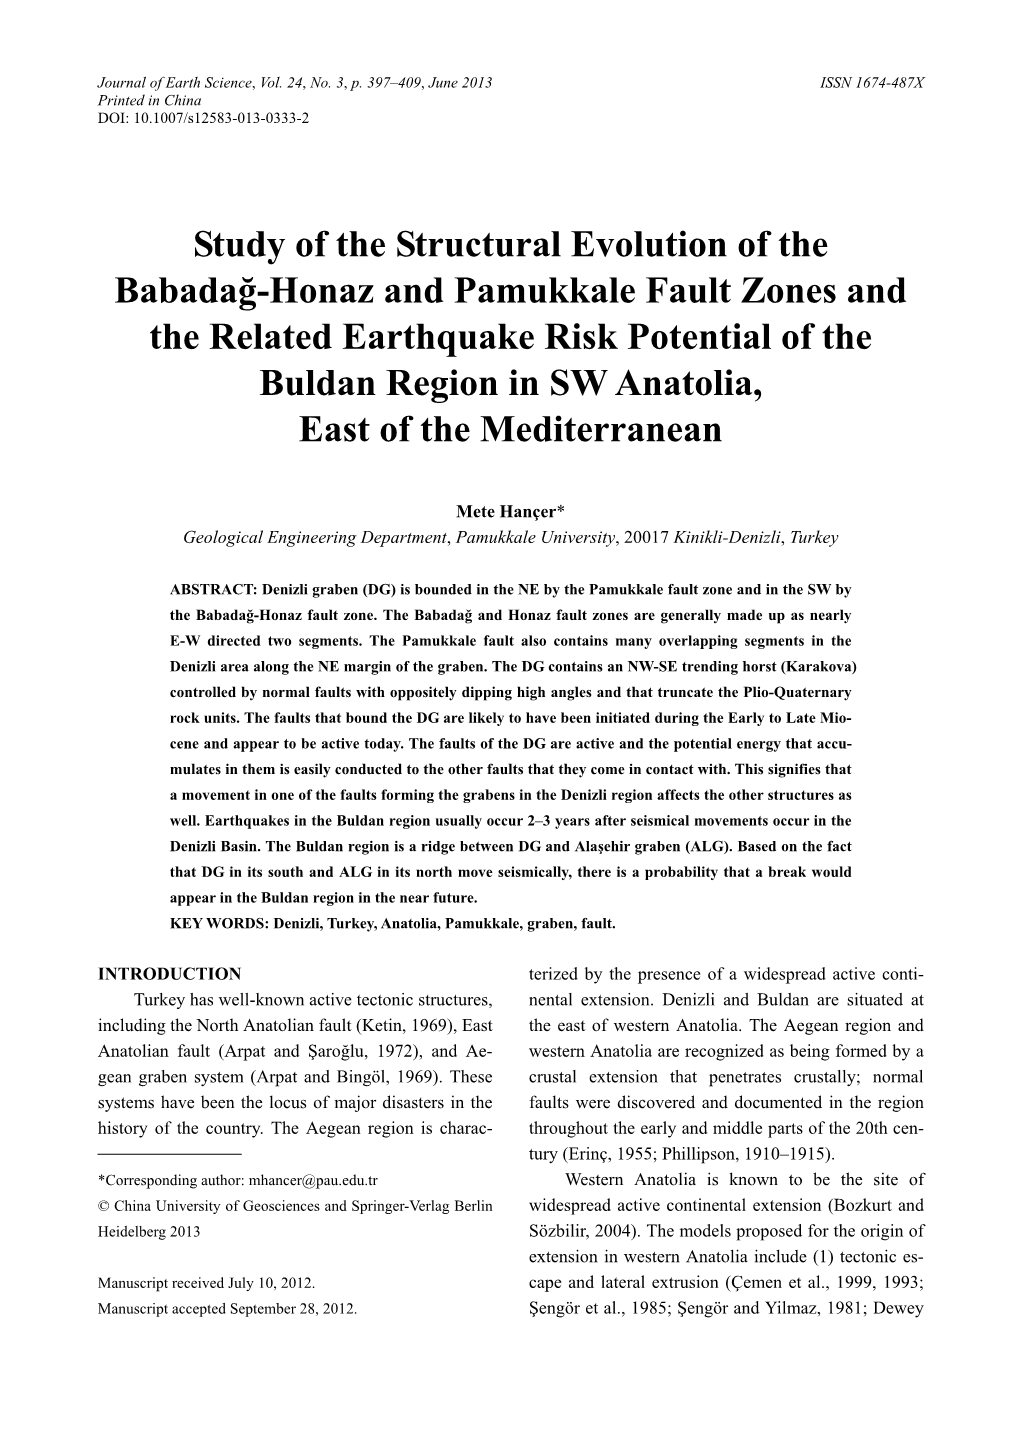 Study of the Structural Evolution of the Babadağ-Honaz and Pamukkale